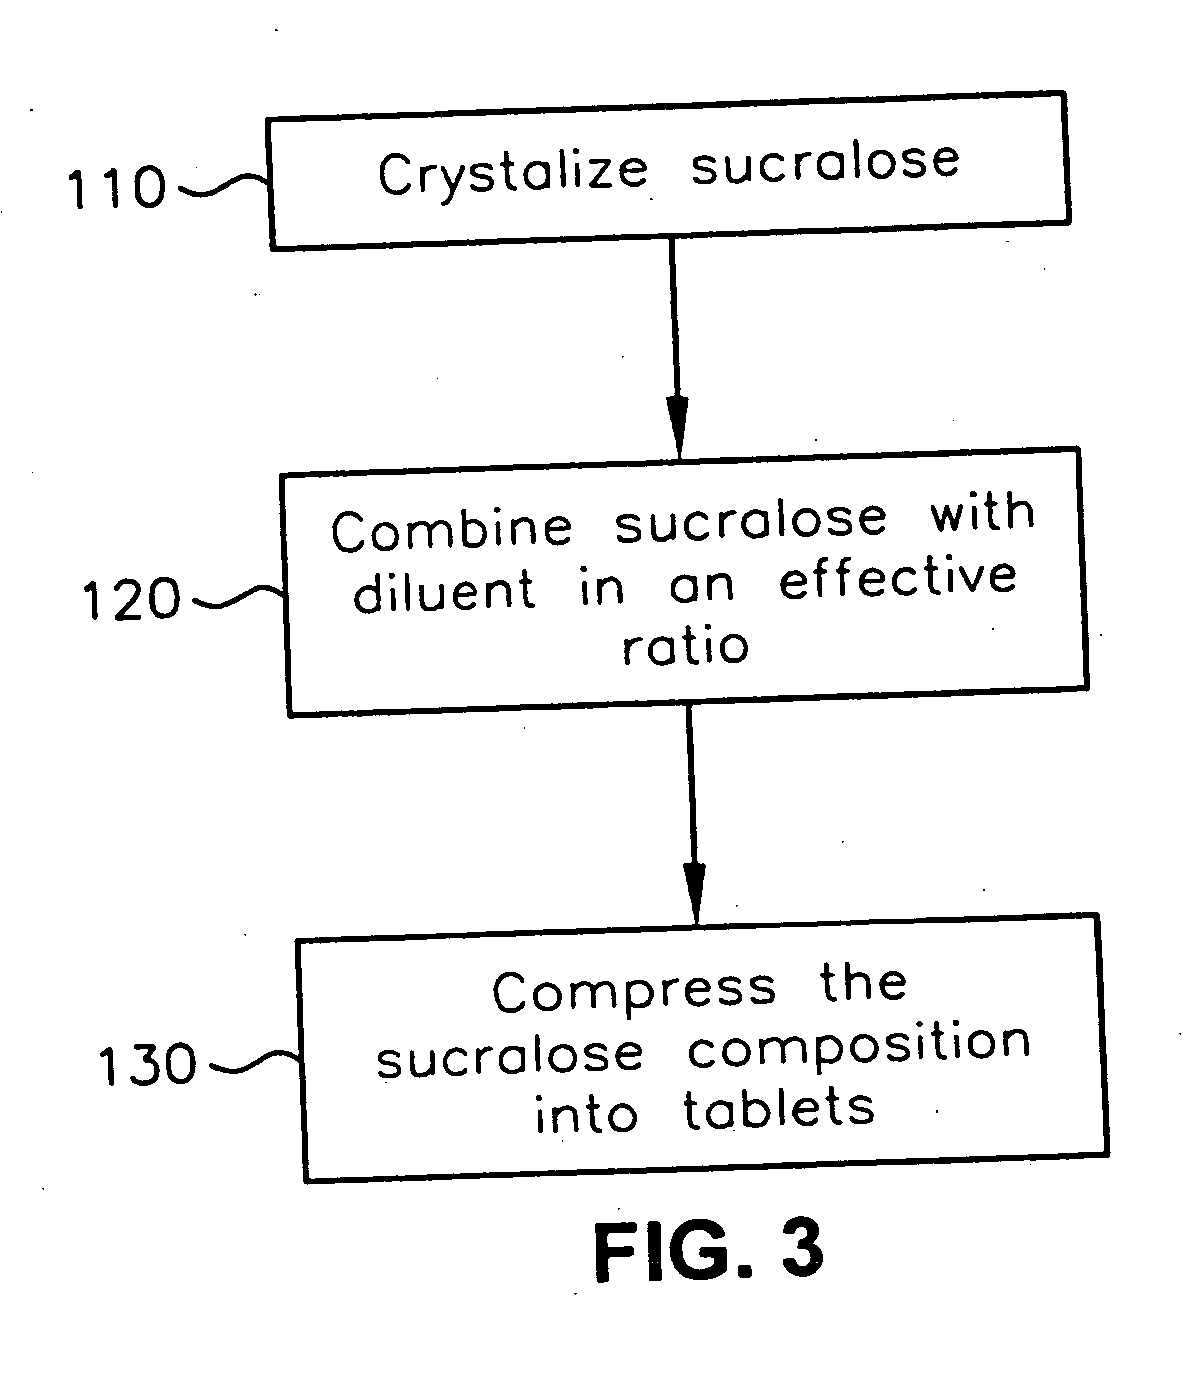 High-intensity sweetener composition and delivery of same